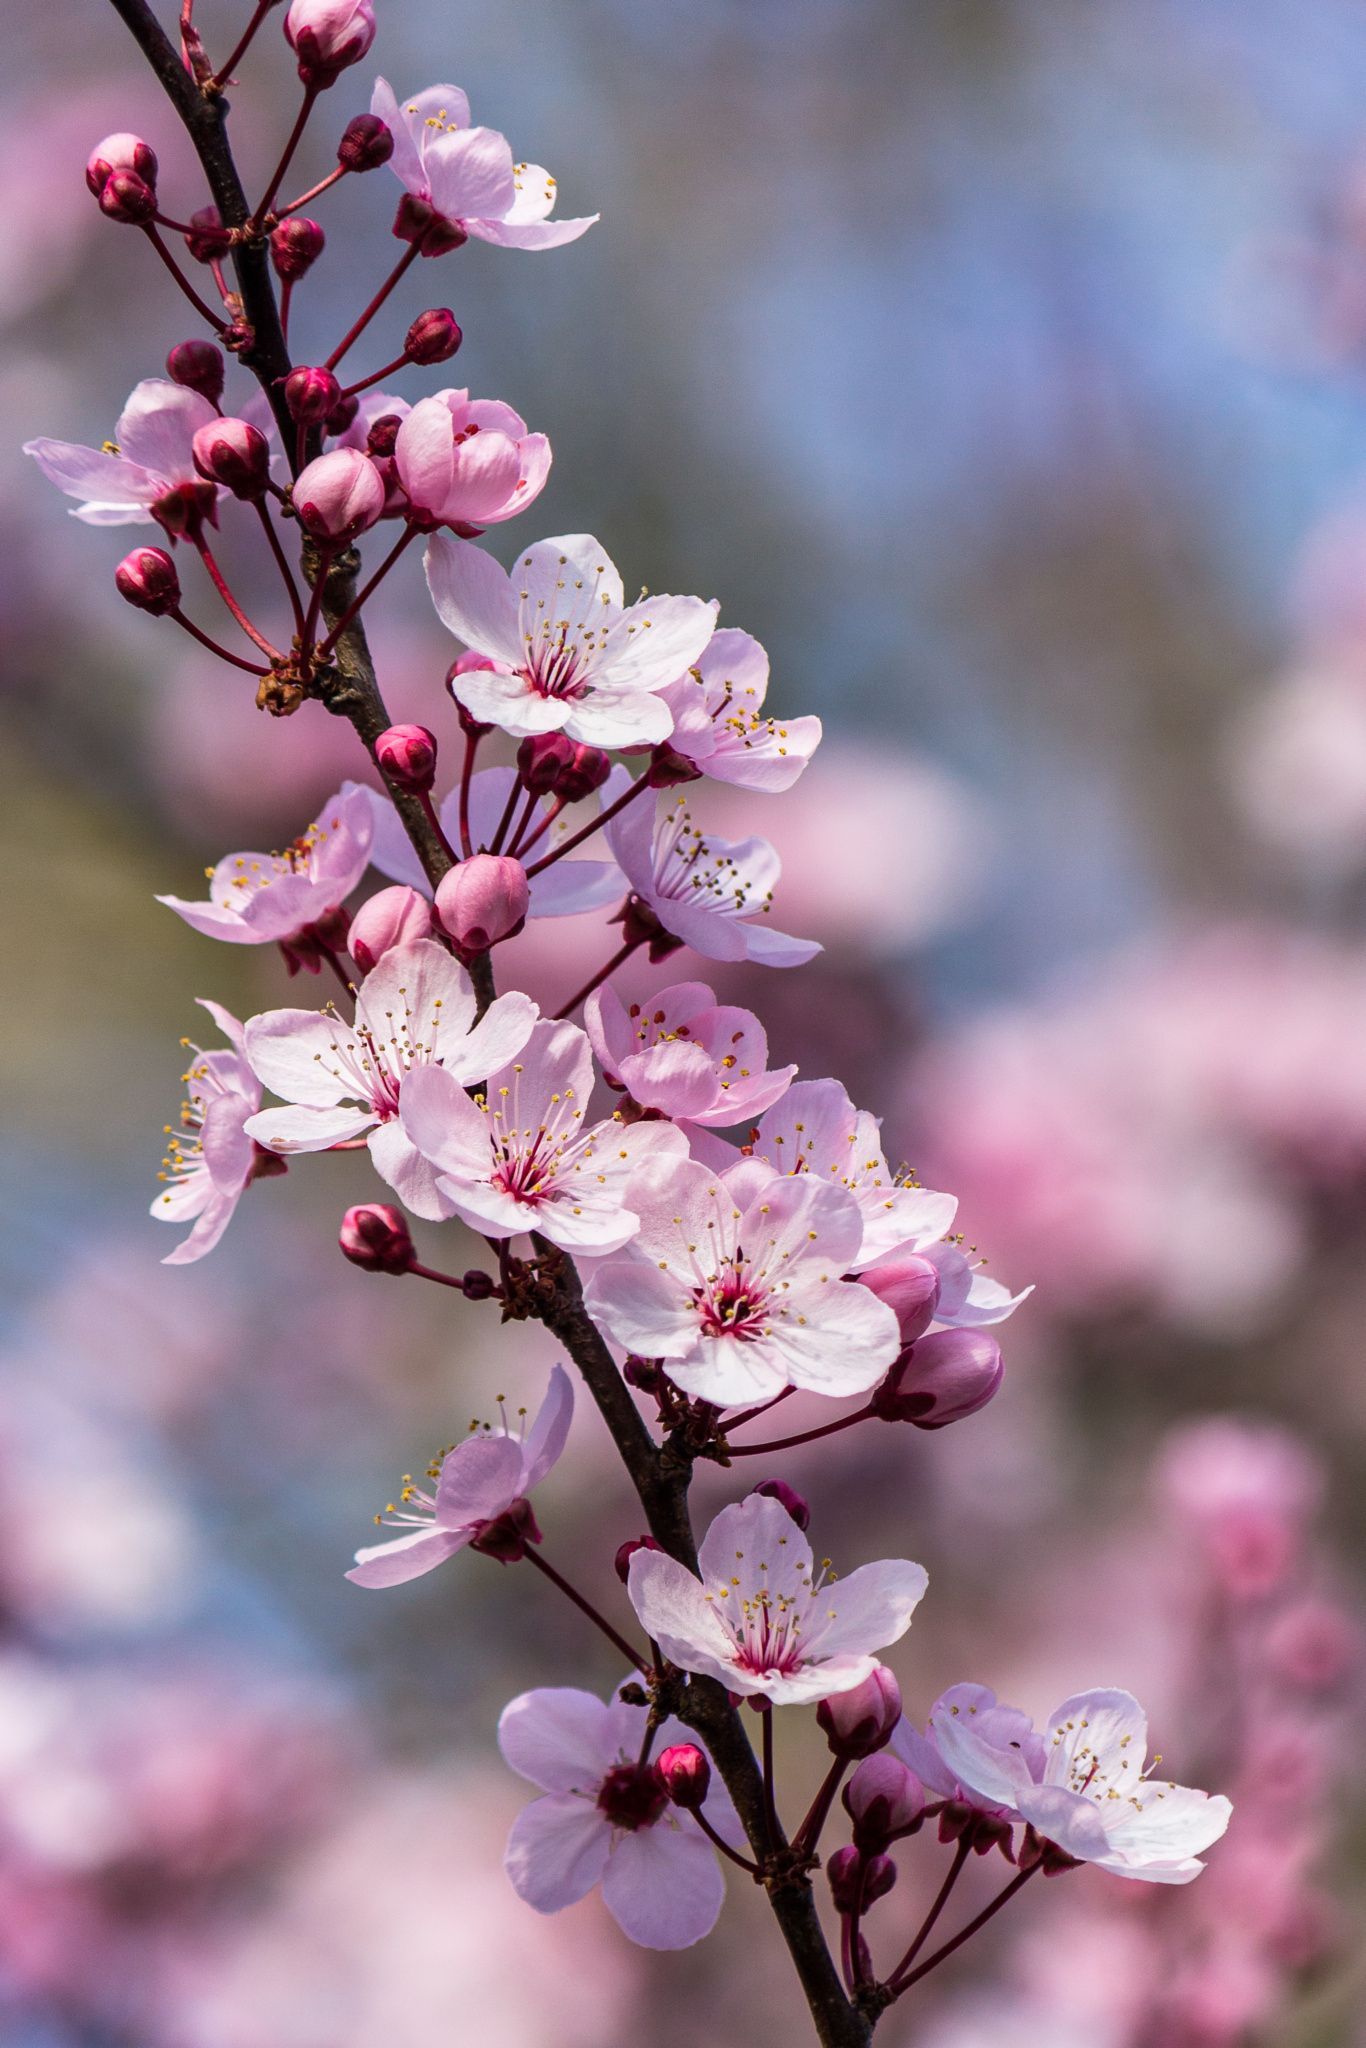 Visions of Plum Blossoms. Cherry blossom picture, Cherry blossom wallpaper, Beautiful flowers wallpaper